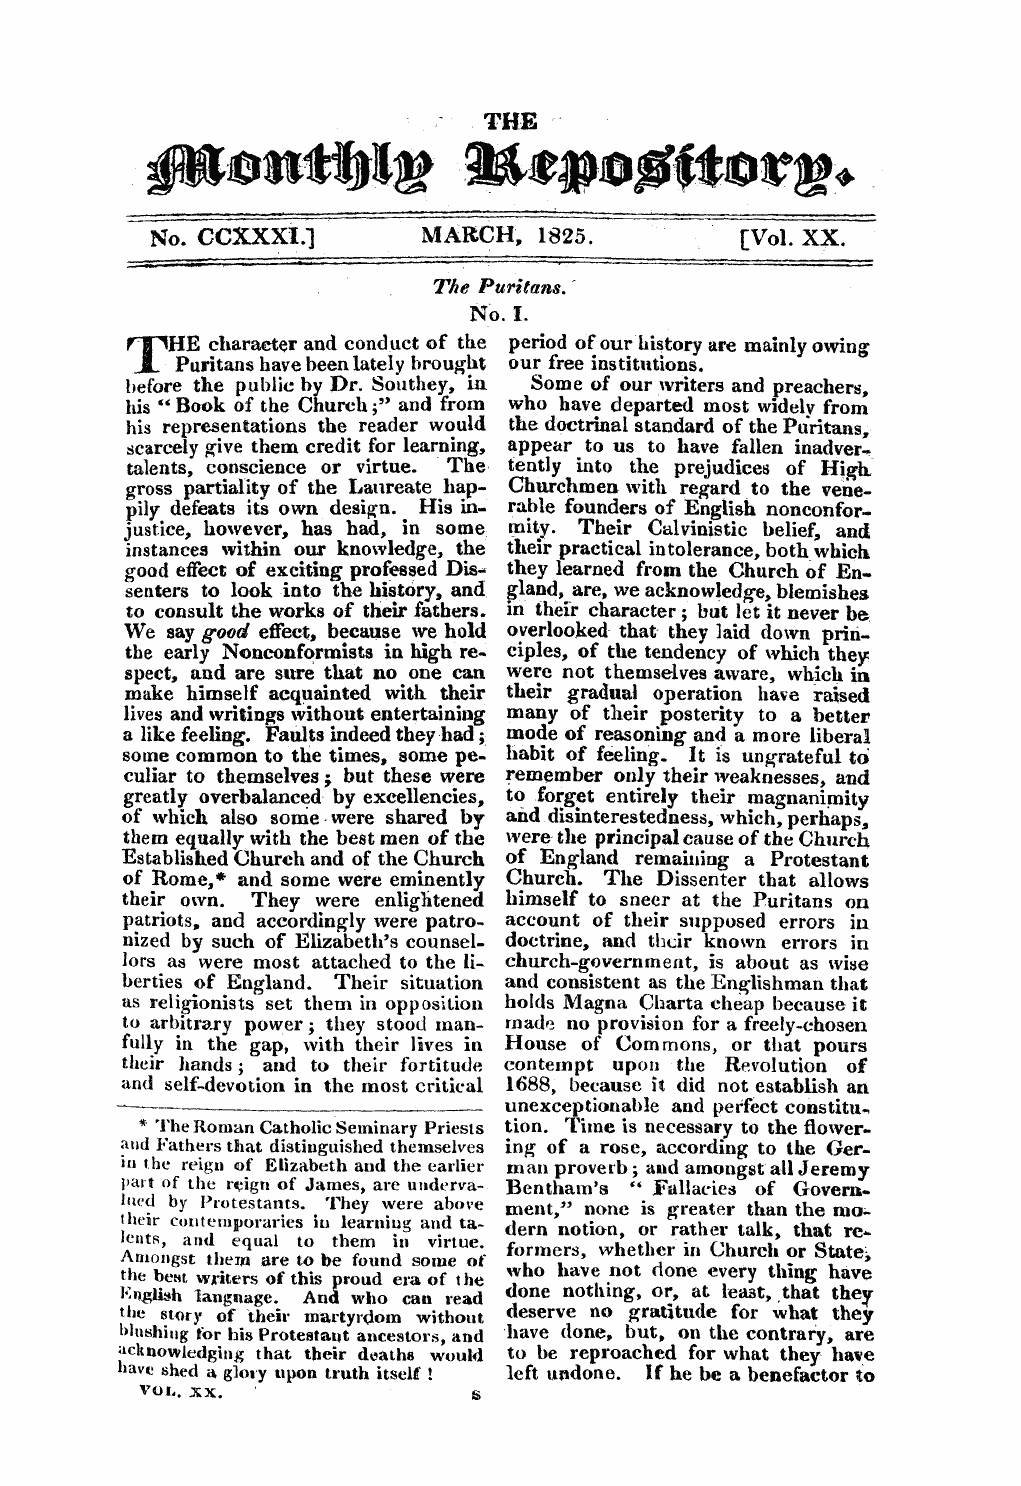 Monthly Repository (1806-1838) and Unitarian Chronicle (1832-1833): F Y, 1st edition - The Puritans. No. I.